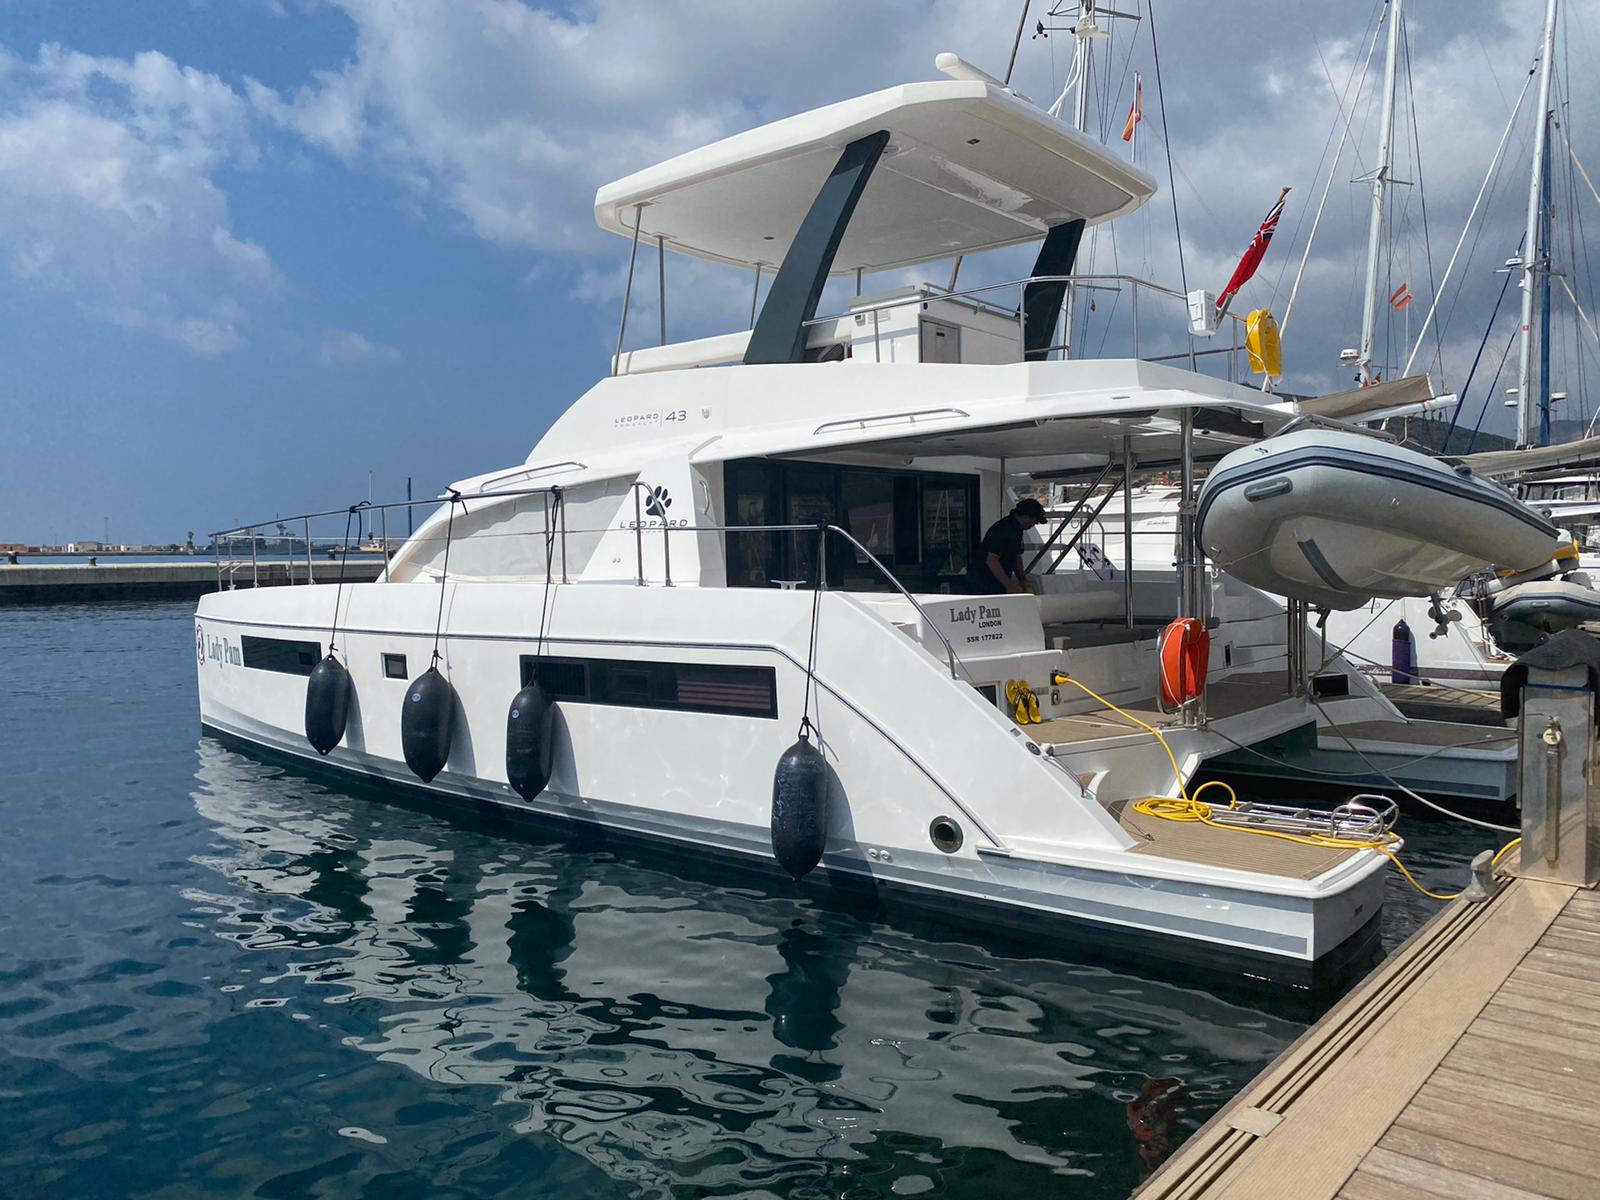 Leopard 43 power catamaran moored up and ready for delivery to Cartagena